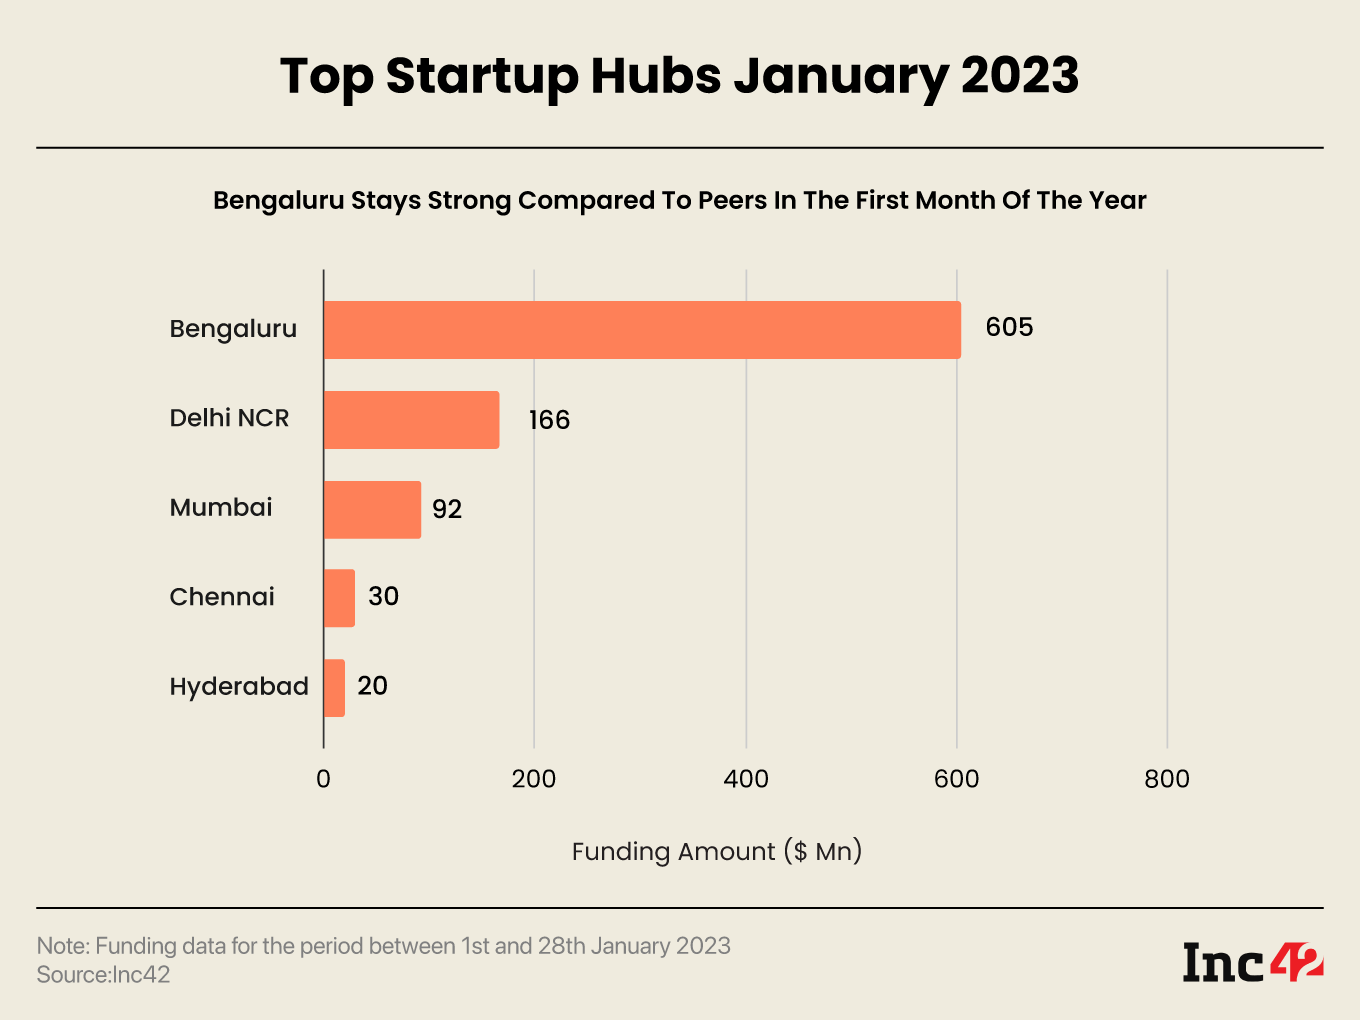 Top startup hubs in January 2023